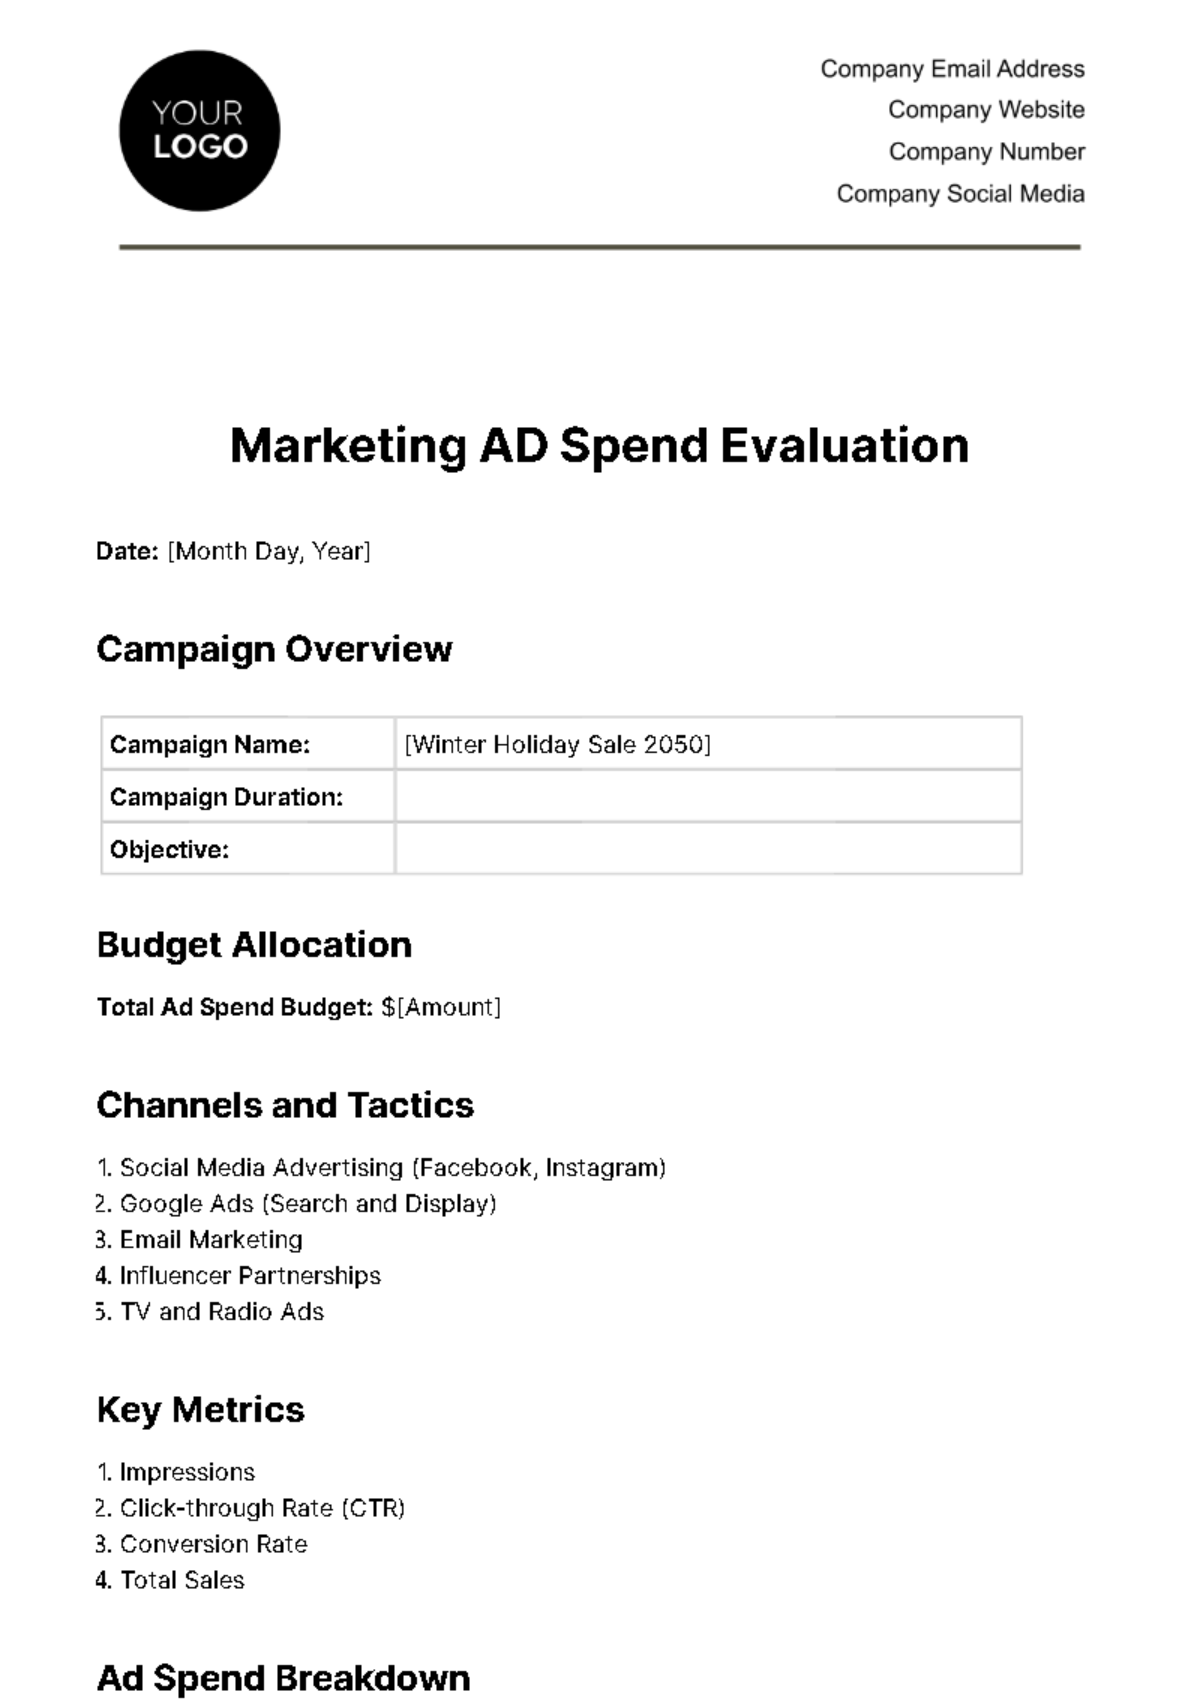 Marketing Ad Spend Evaluation Template